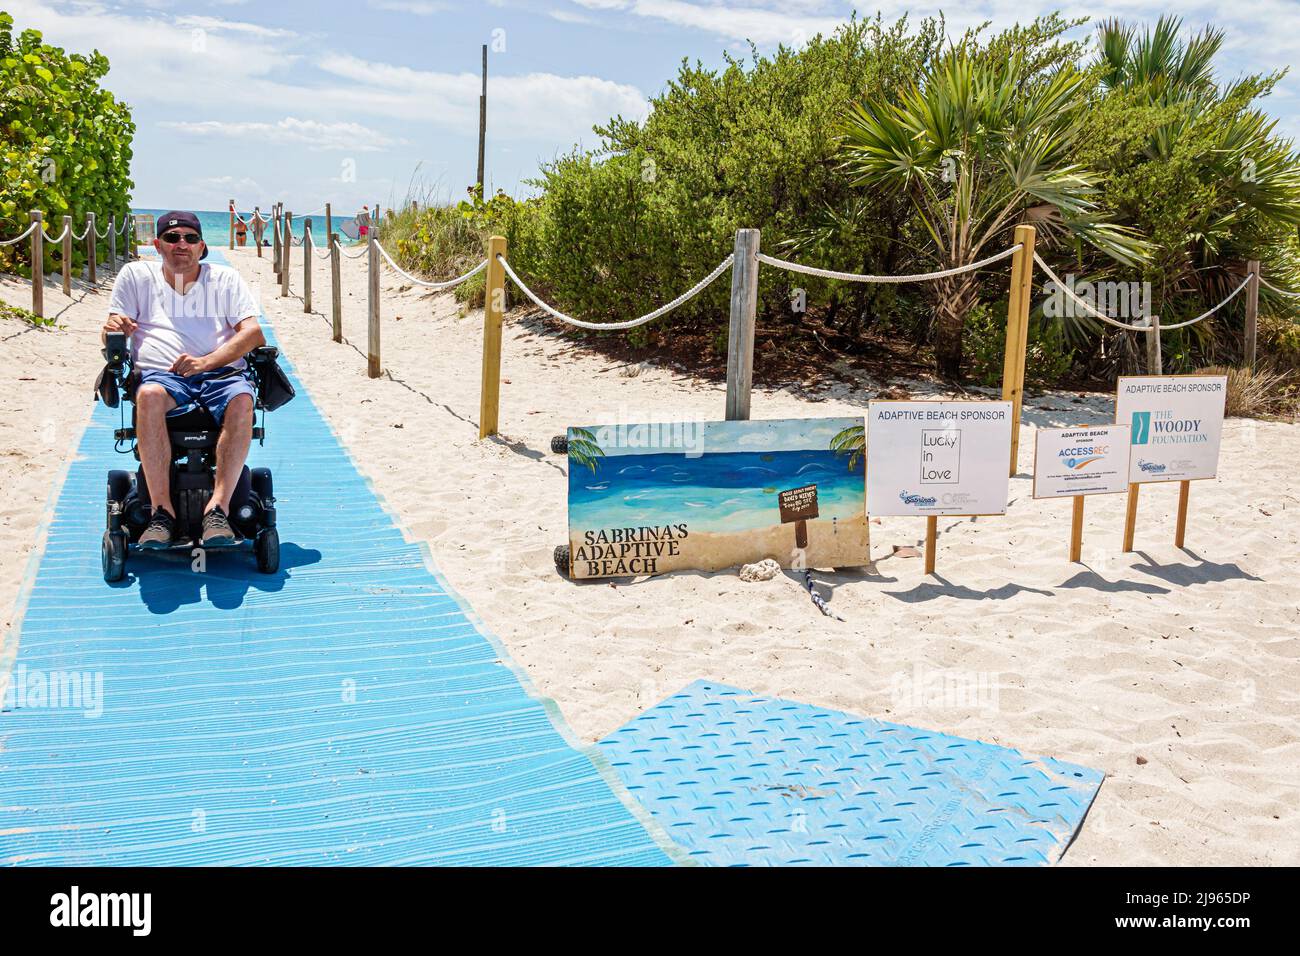 Miami Beach Florida,Sabrina Cohen Adaptive Beach Day,disabled special needs handicapped WaterWheels floating wheelchair,mat ramp entrance signs sponso Stock Photo